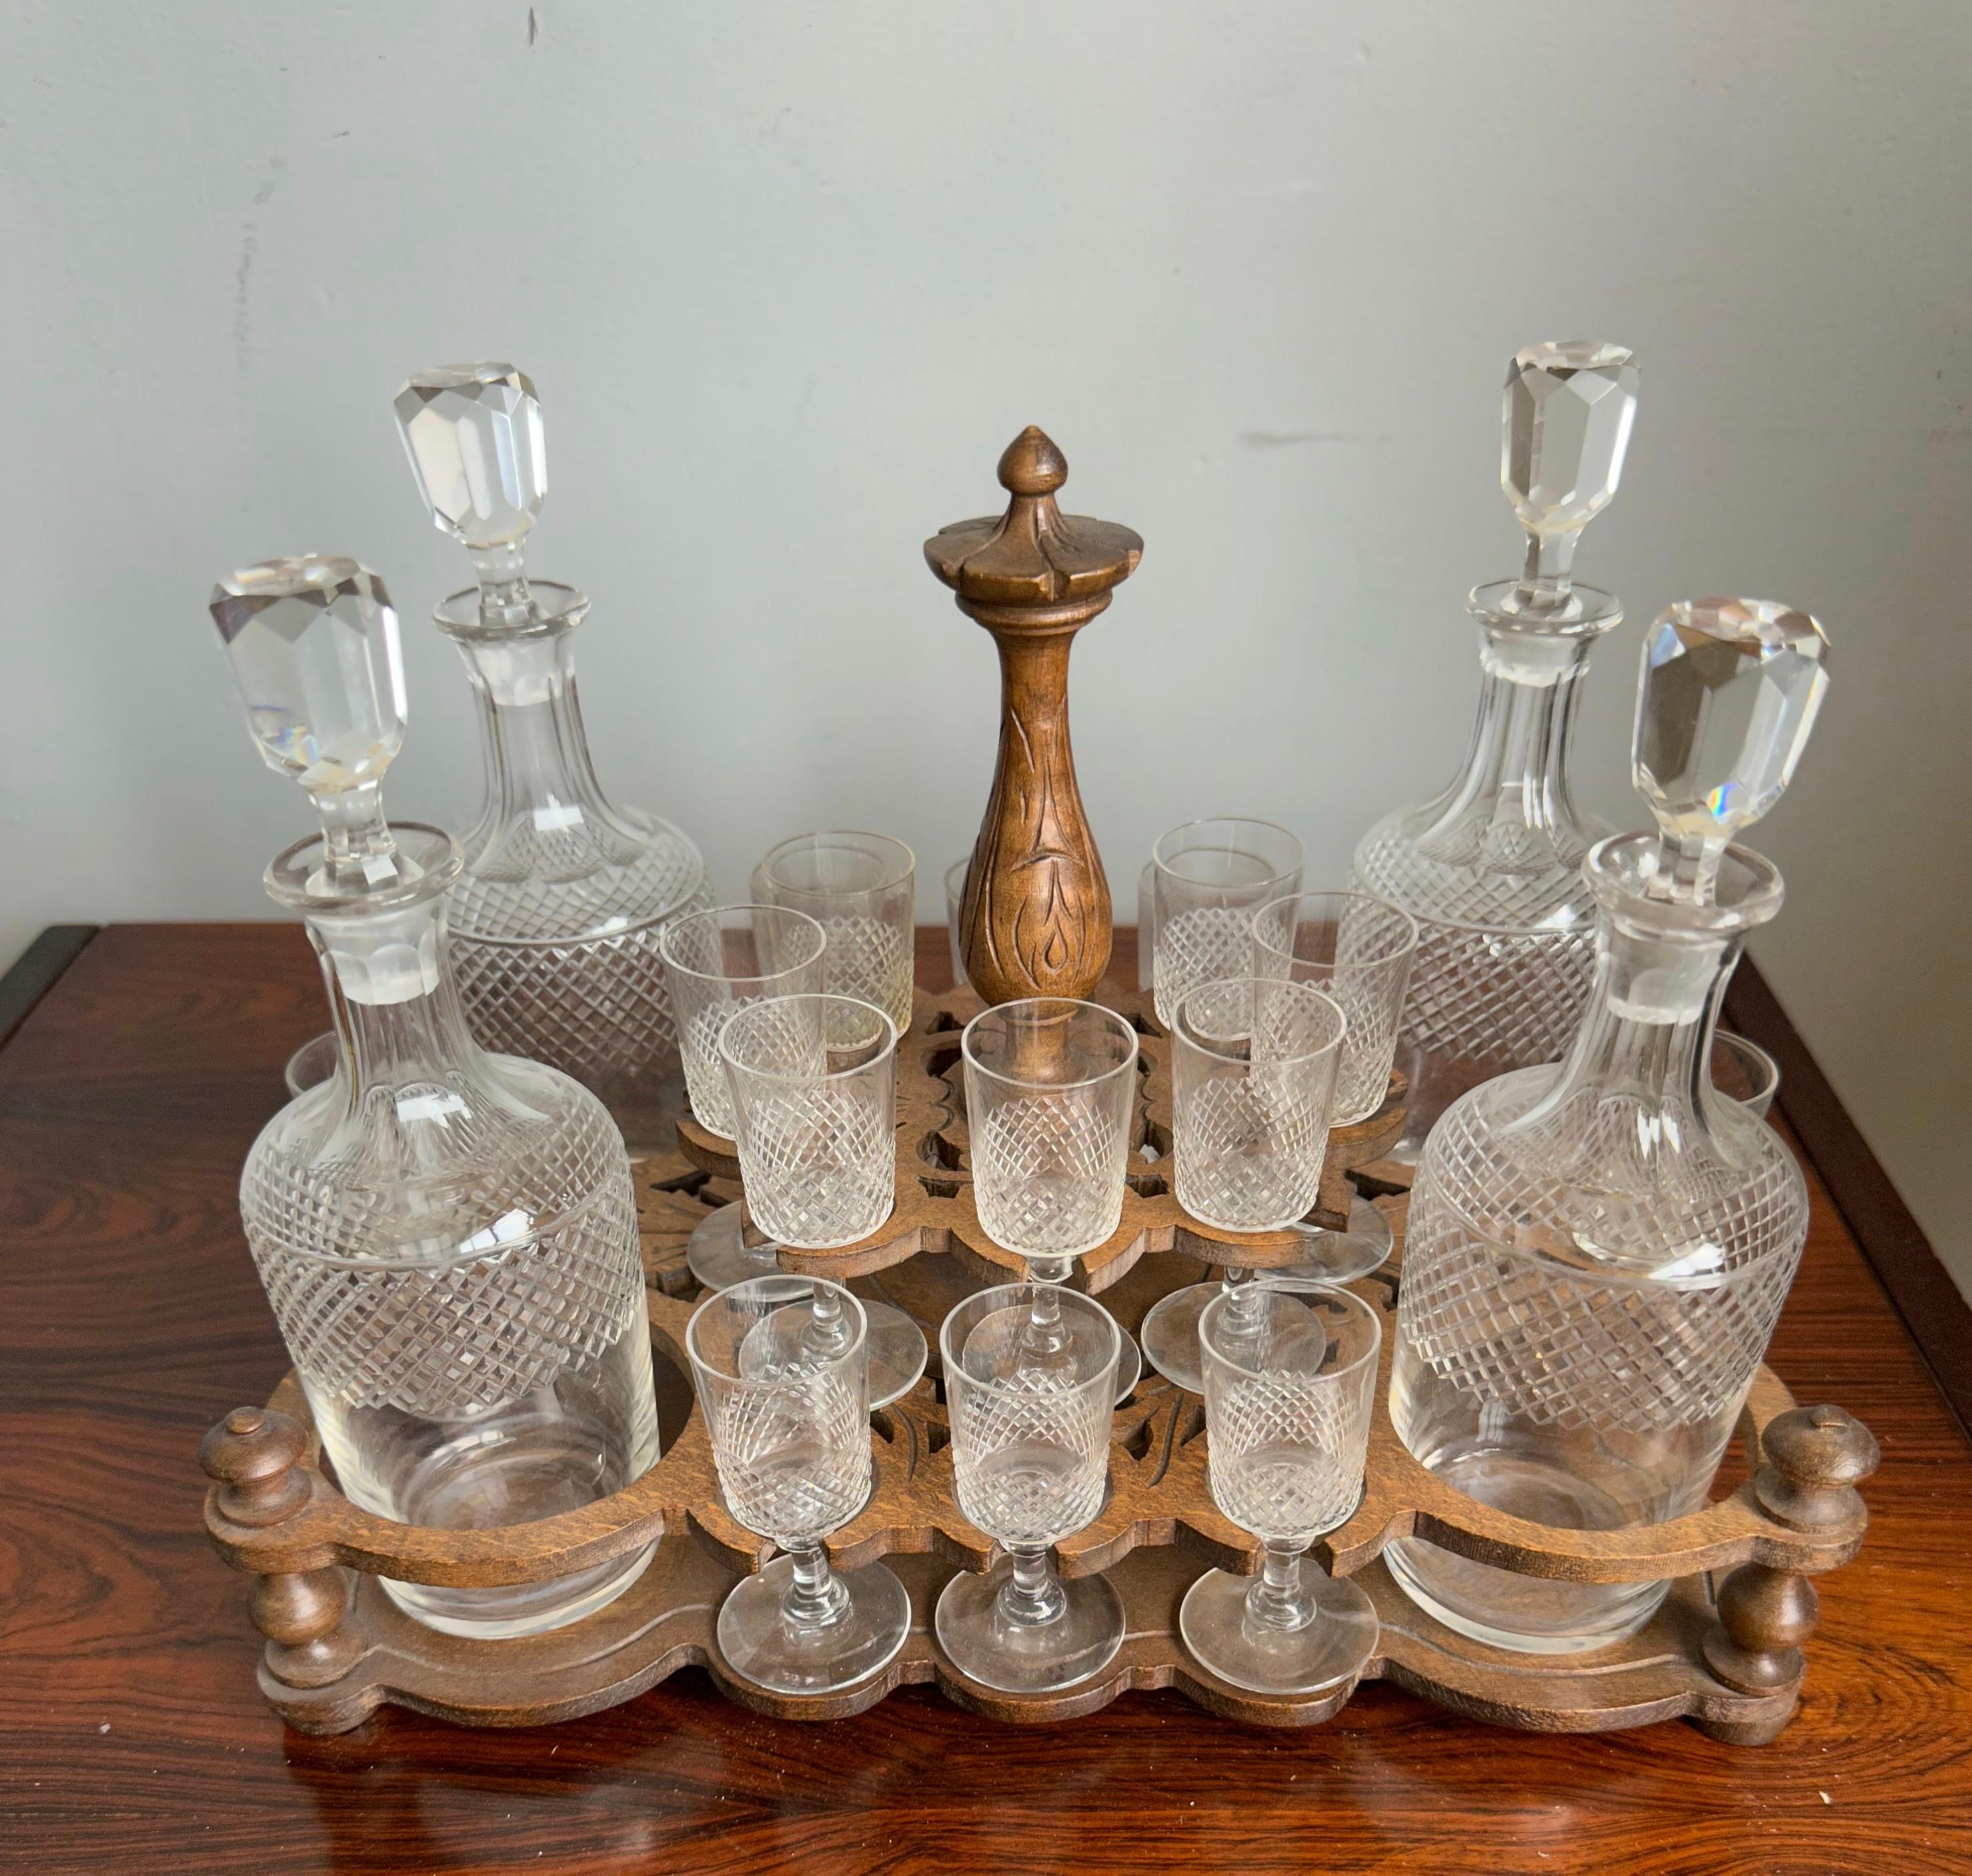 19th Century Victorian Era Black Forest Liquor Tantalus with Glasses & Decanters For Sale 8